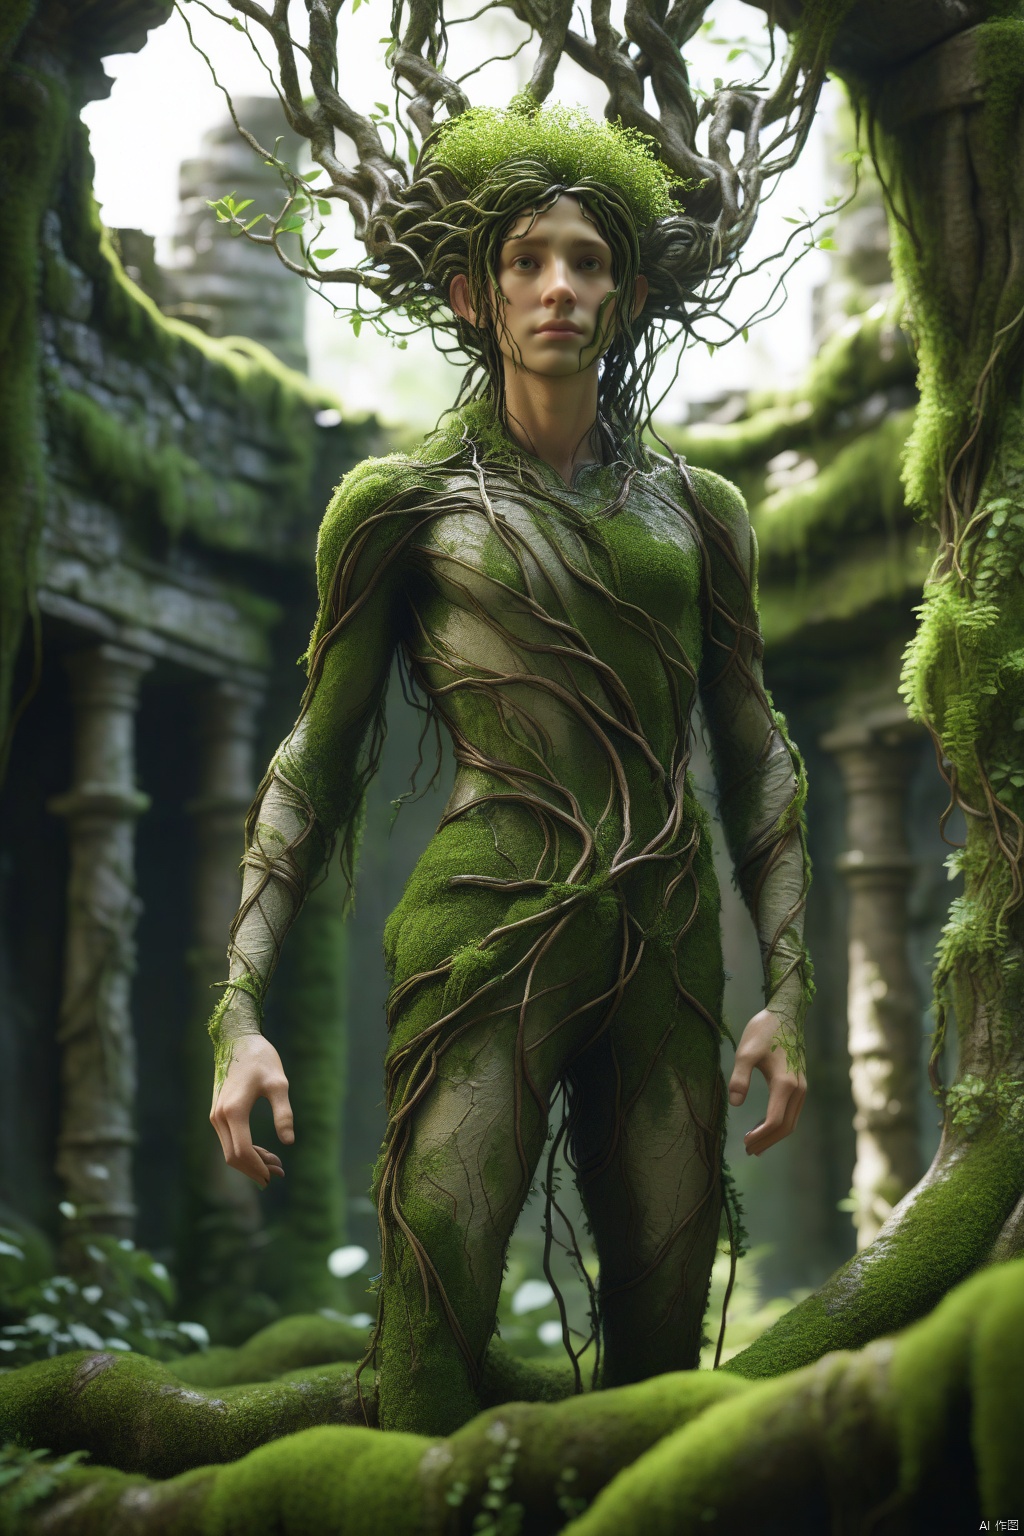  Bioengineered tree-human hybrid,looking at viewer,entwined branches for hair,bark skin,foliage sprouting from body,standing in an overgrown ruins,with moss and vines,ultra realistic,high resolution,depth of field,aesthetic,product introduction photo,